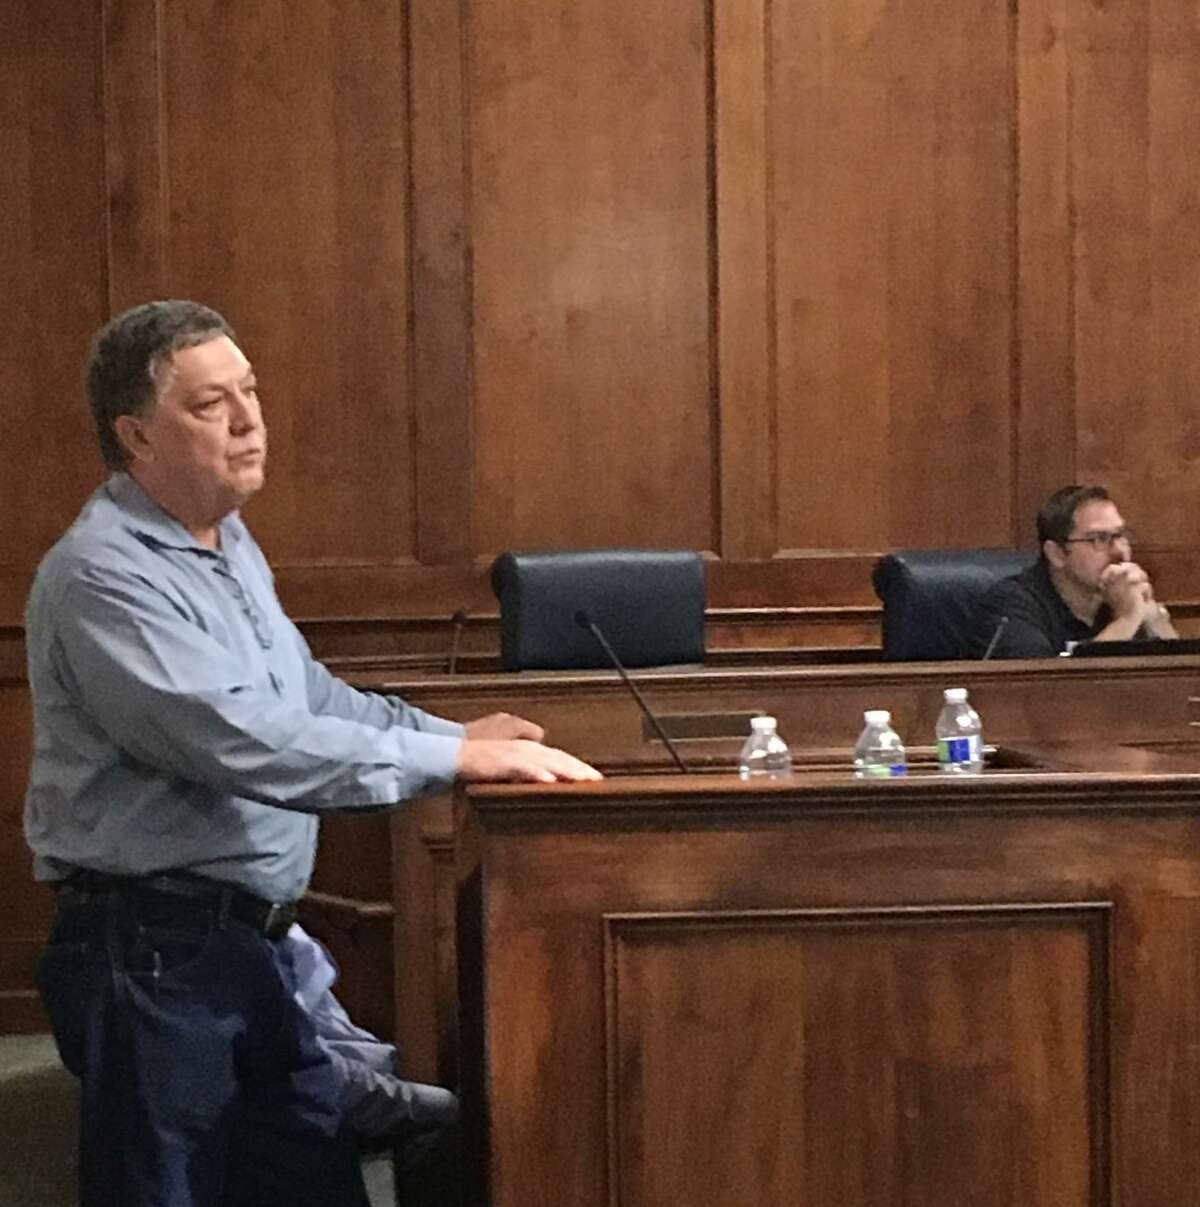 David Leyendecker, city engineer for the City of Katy, gave residents details about the First Street project Nov. 8 at Katy City Hall. In the back is Ward A Councilman Frank O. Carroll III.